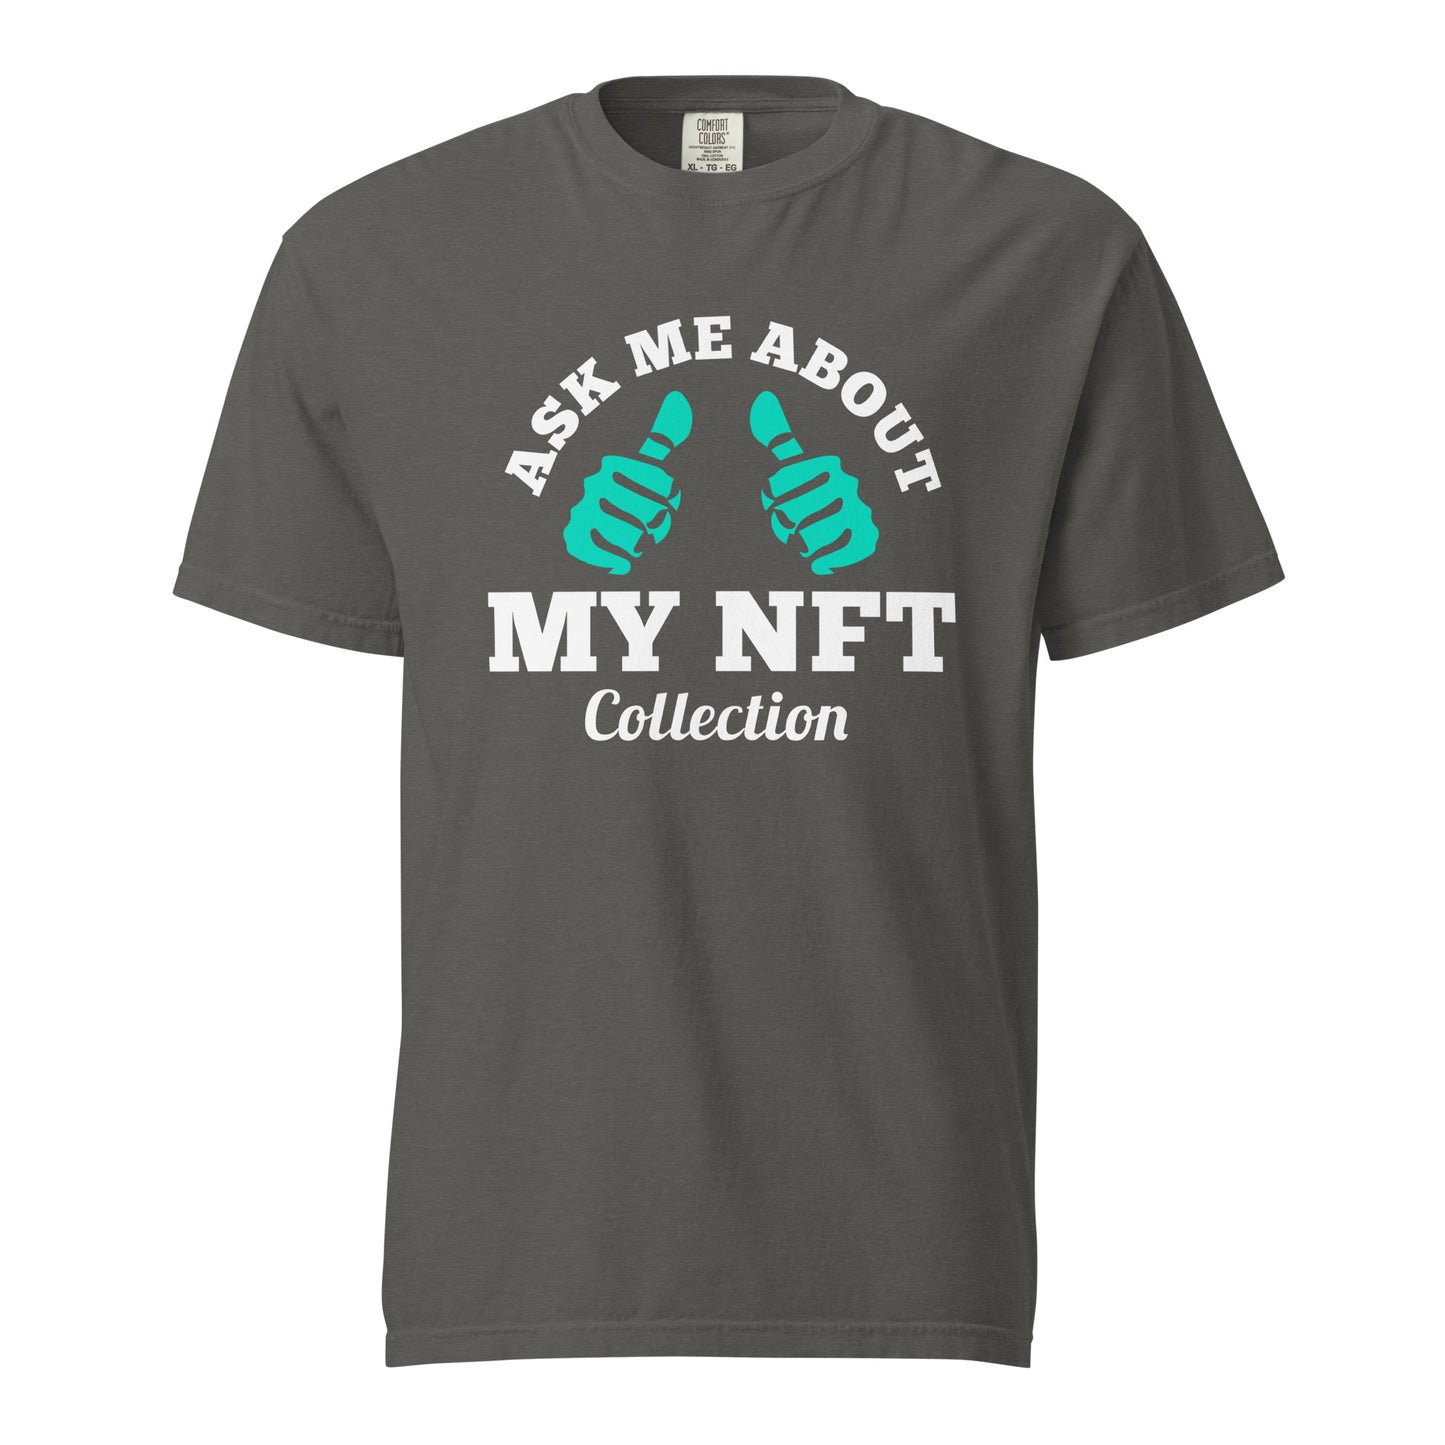 Ask me about my Nft collection heavyweight t-shirt